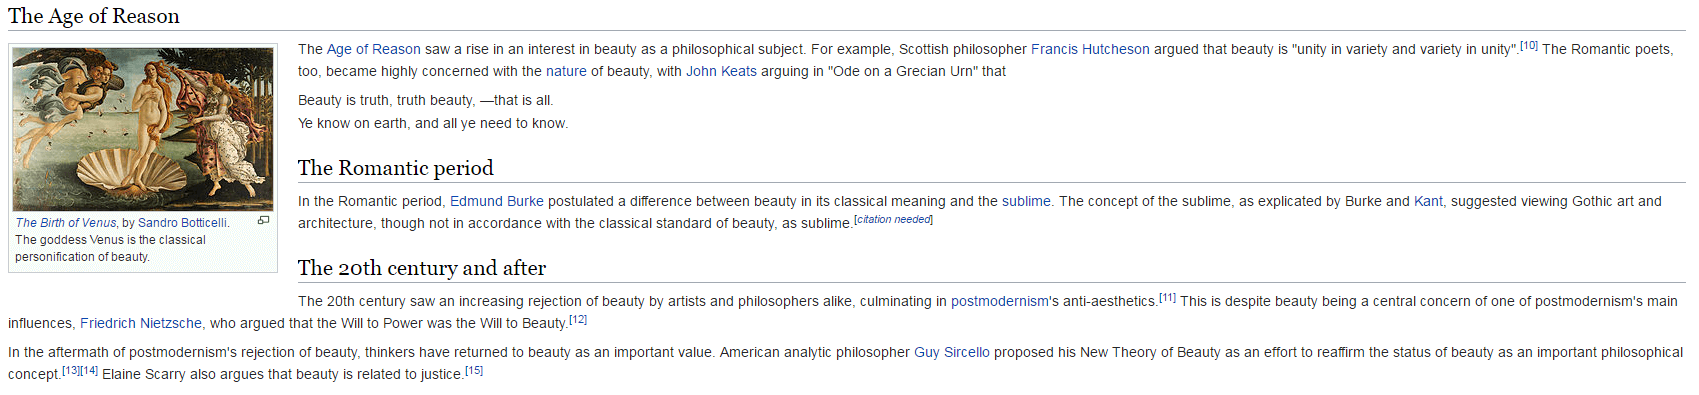 Extract from the original Wikipedia article on the topic of 'Beauty'